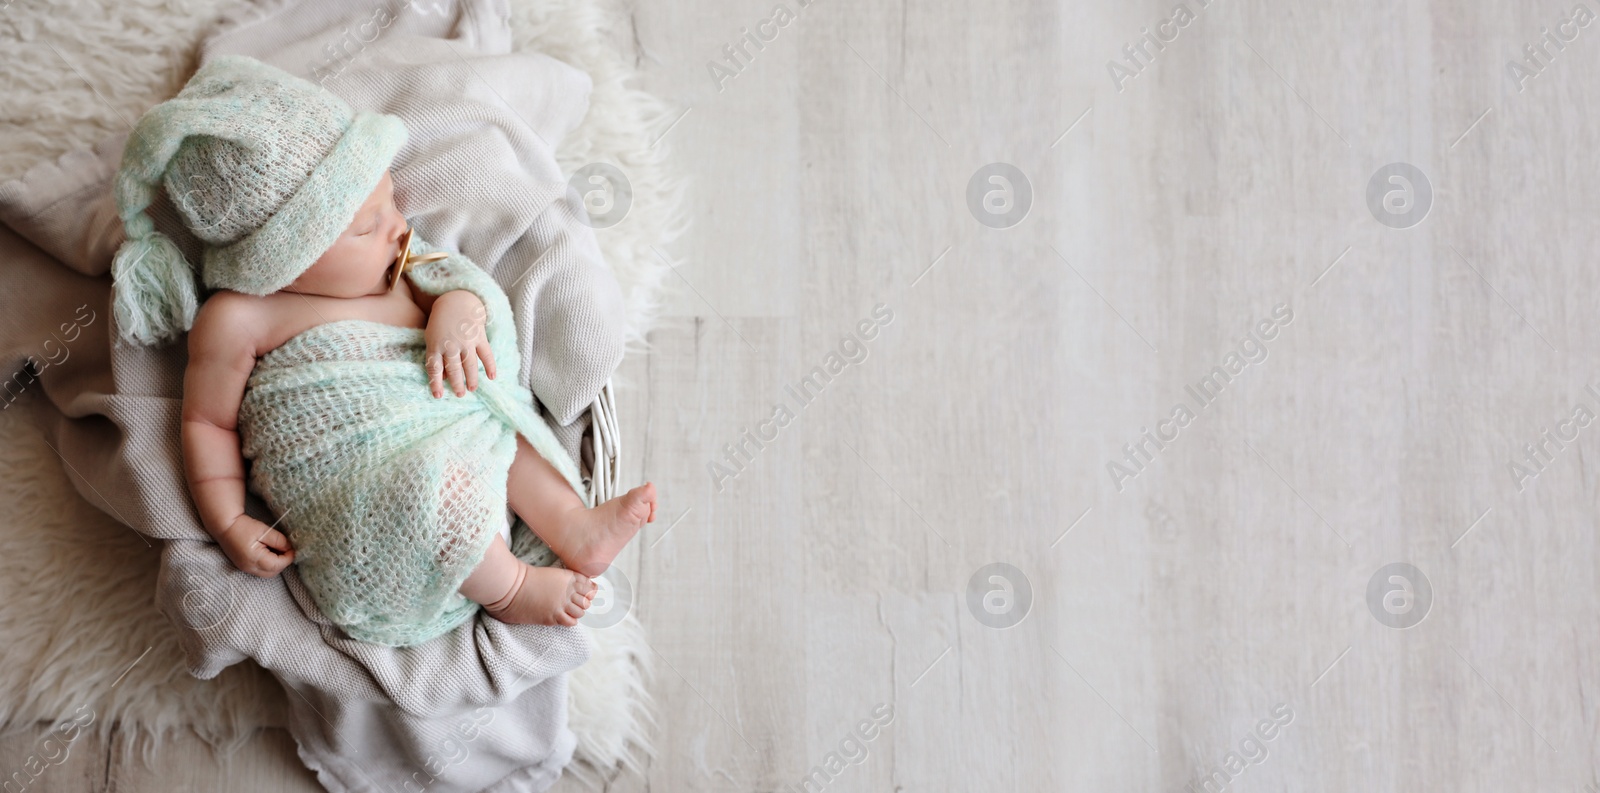 Image of Cute newborn baby sleeping on plaid in basket, top view with space for text. Banner design